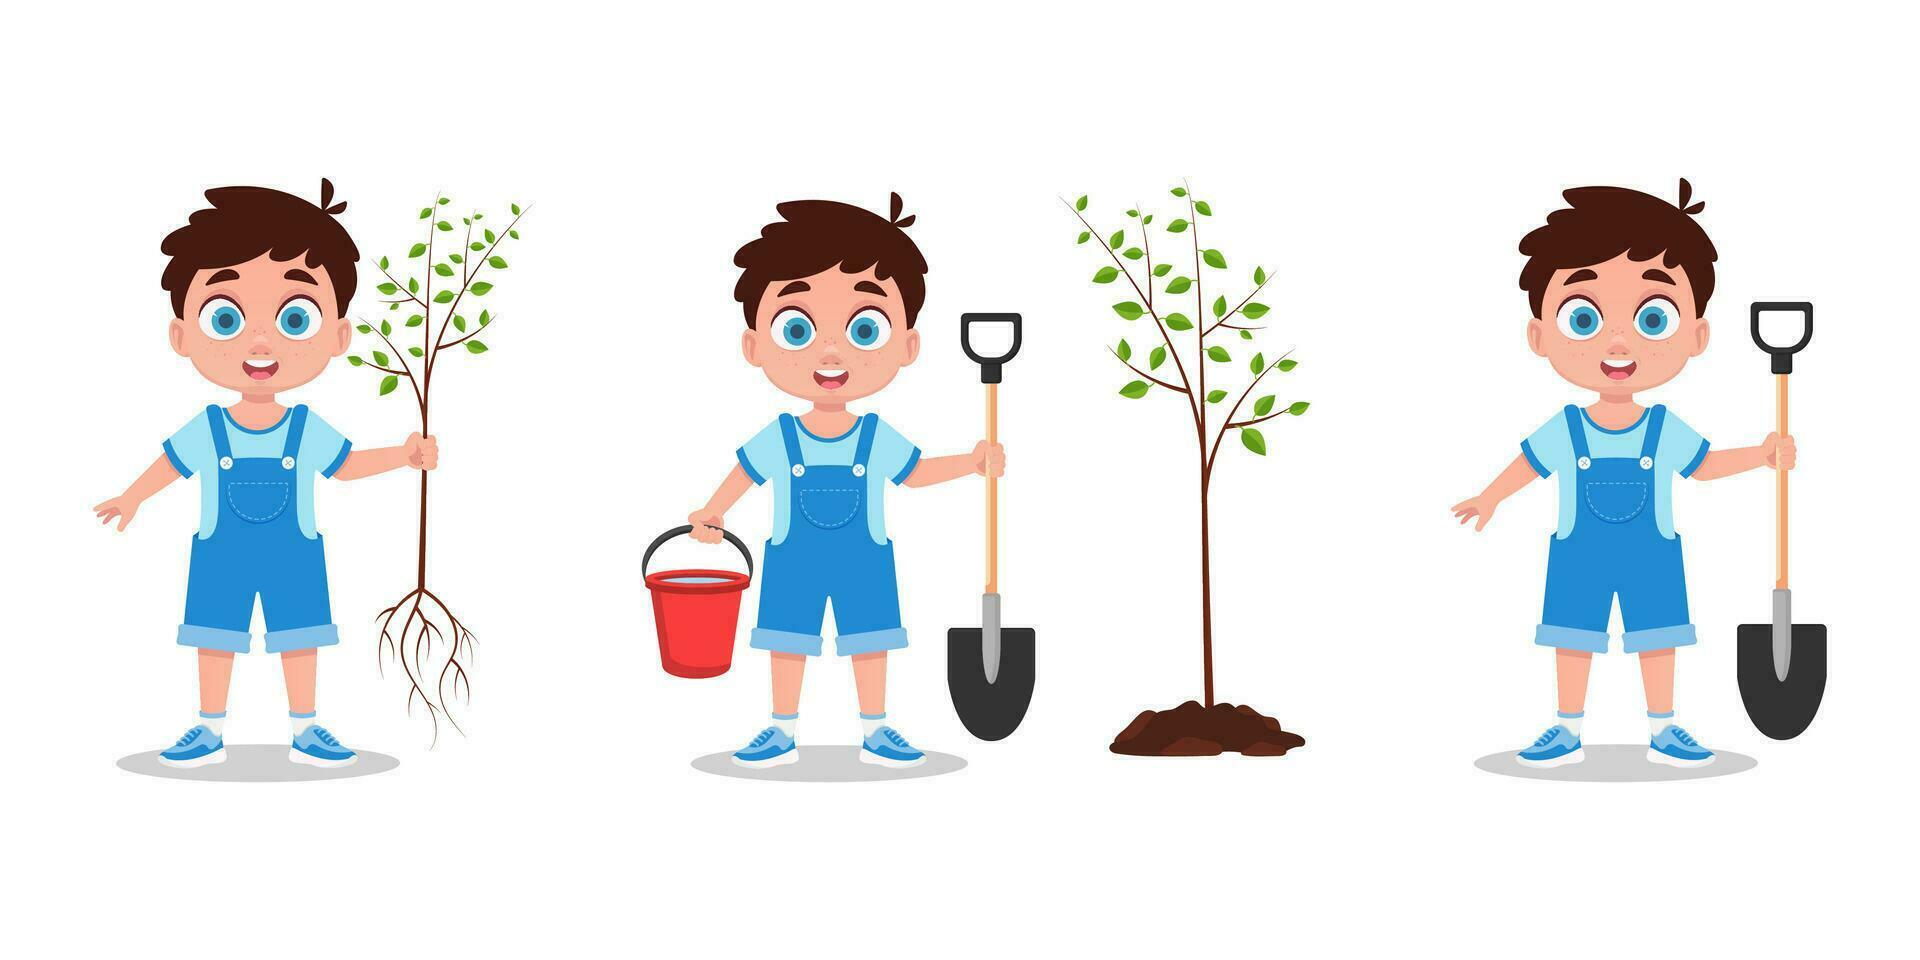 Set of illustrations of a boy planting a tree vector